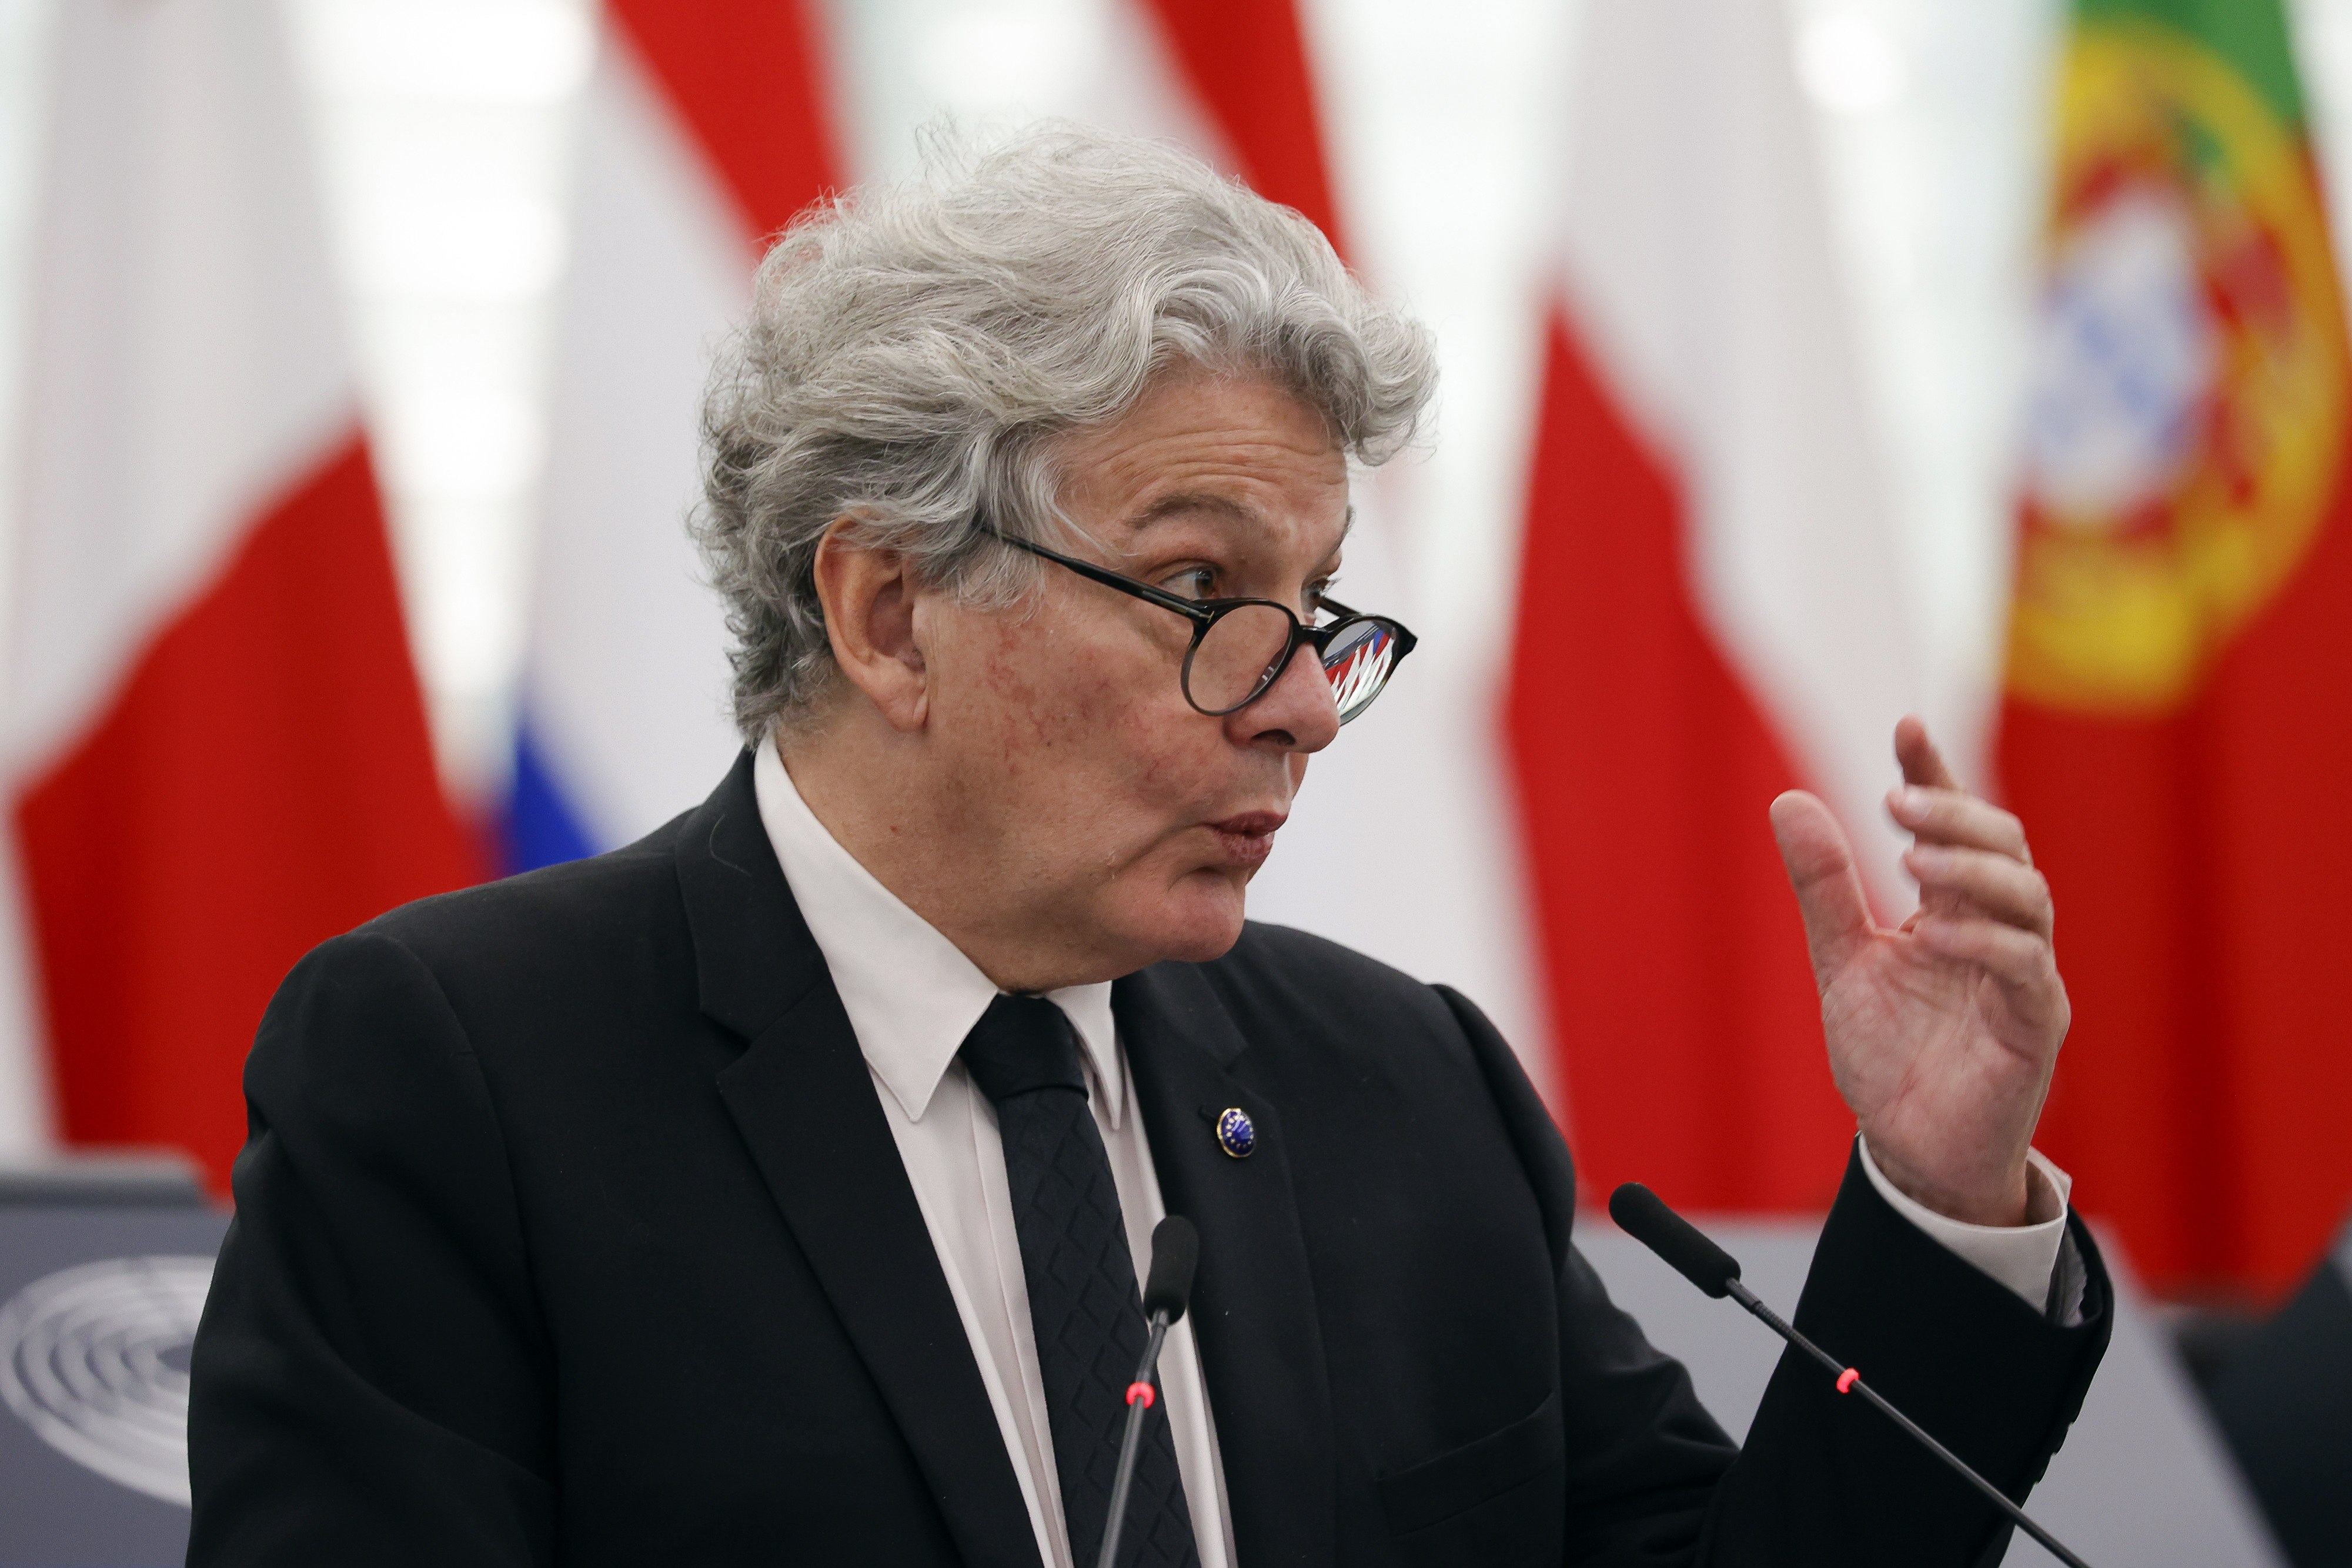 Thierry Breton, the EU’s internal-market commissioner, speaks at the European Parliament in Strasbourg, France, on Tuesday. Photo: EPA-EFE